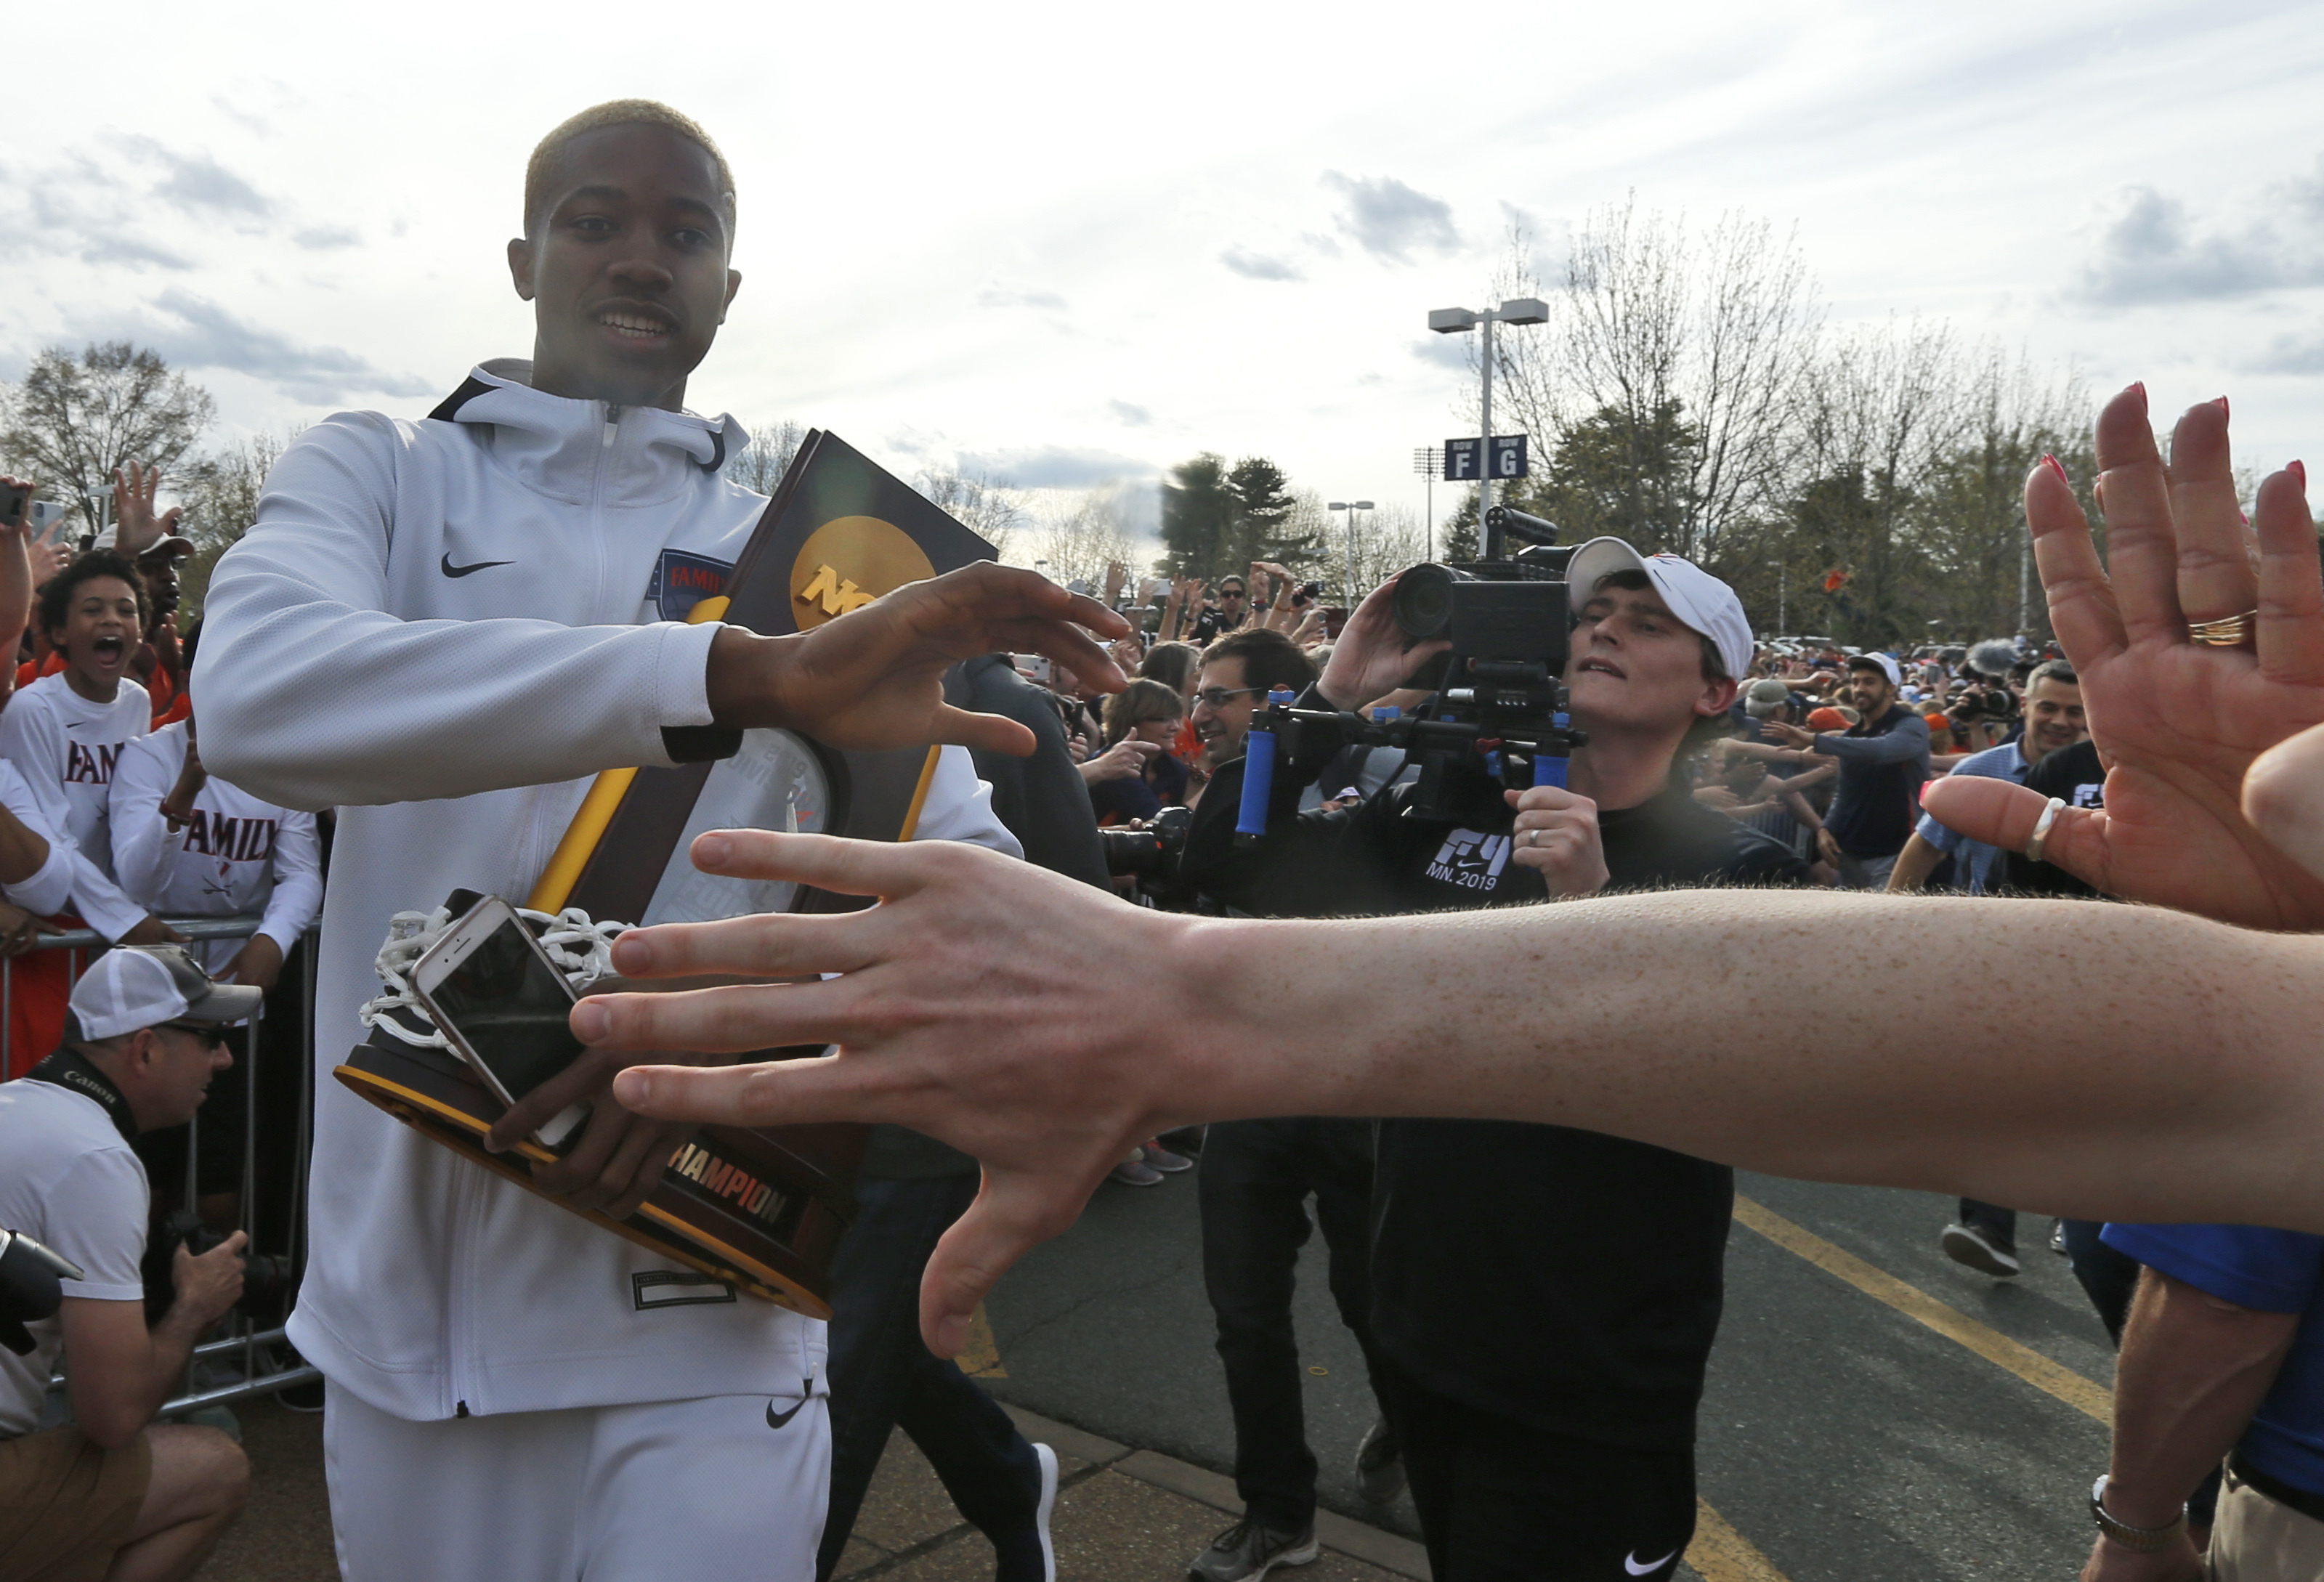 Huge crowd welcomes home national hoops champion Cavaliers